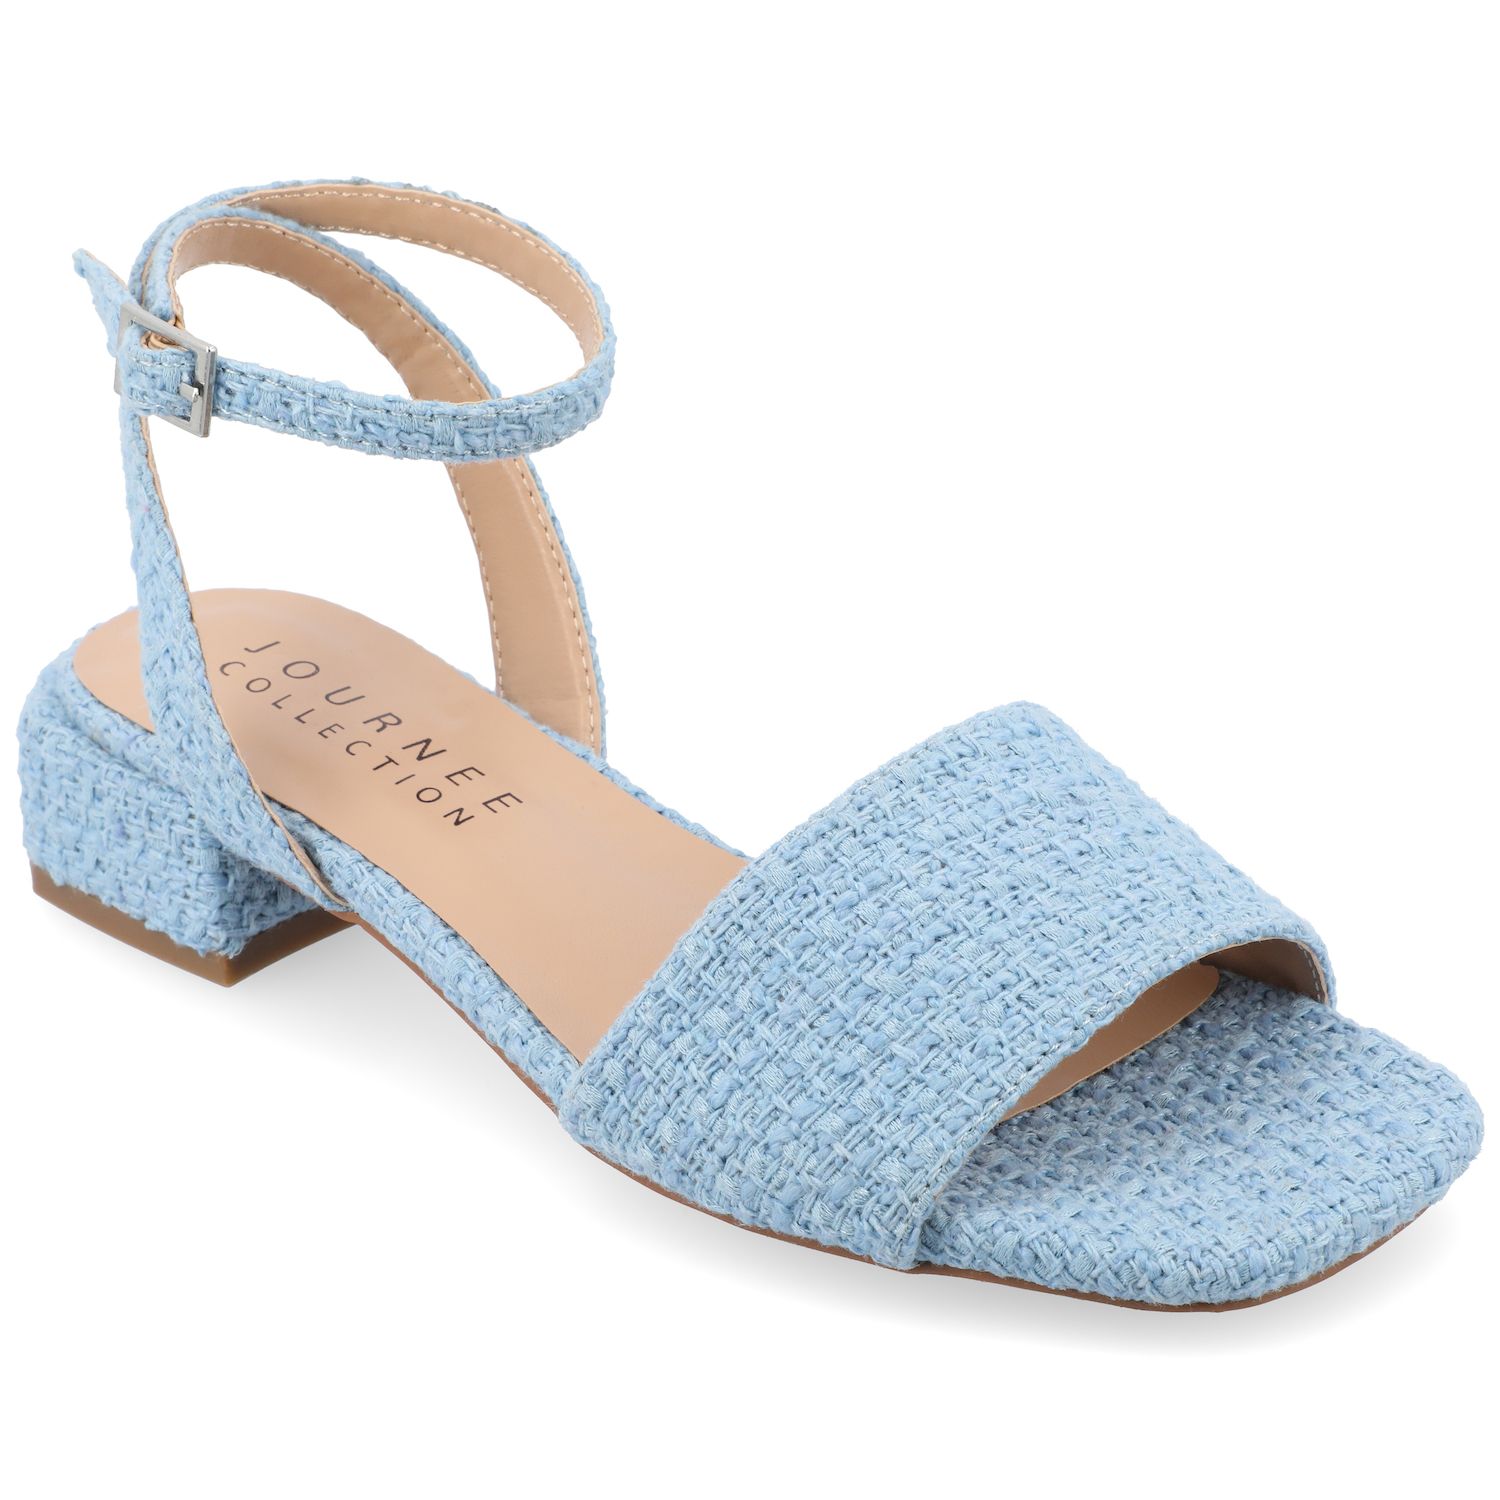 Block heels in pastel colors fit right in with your spring wardrobe.